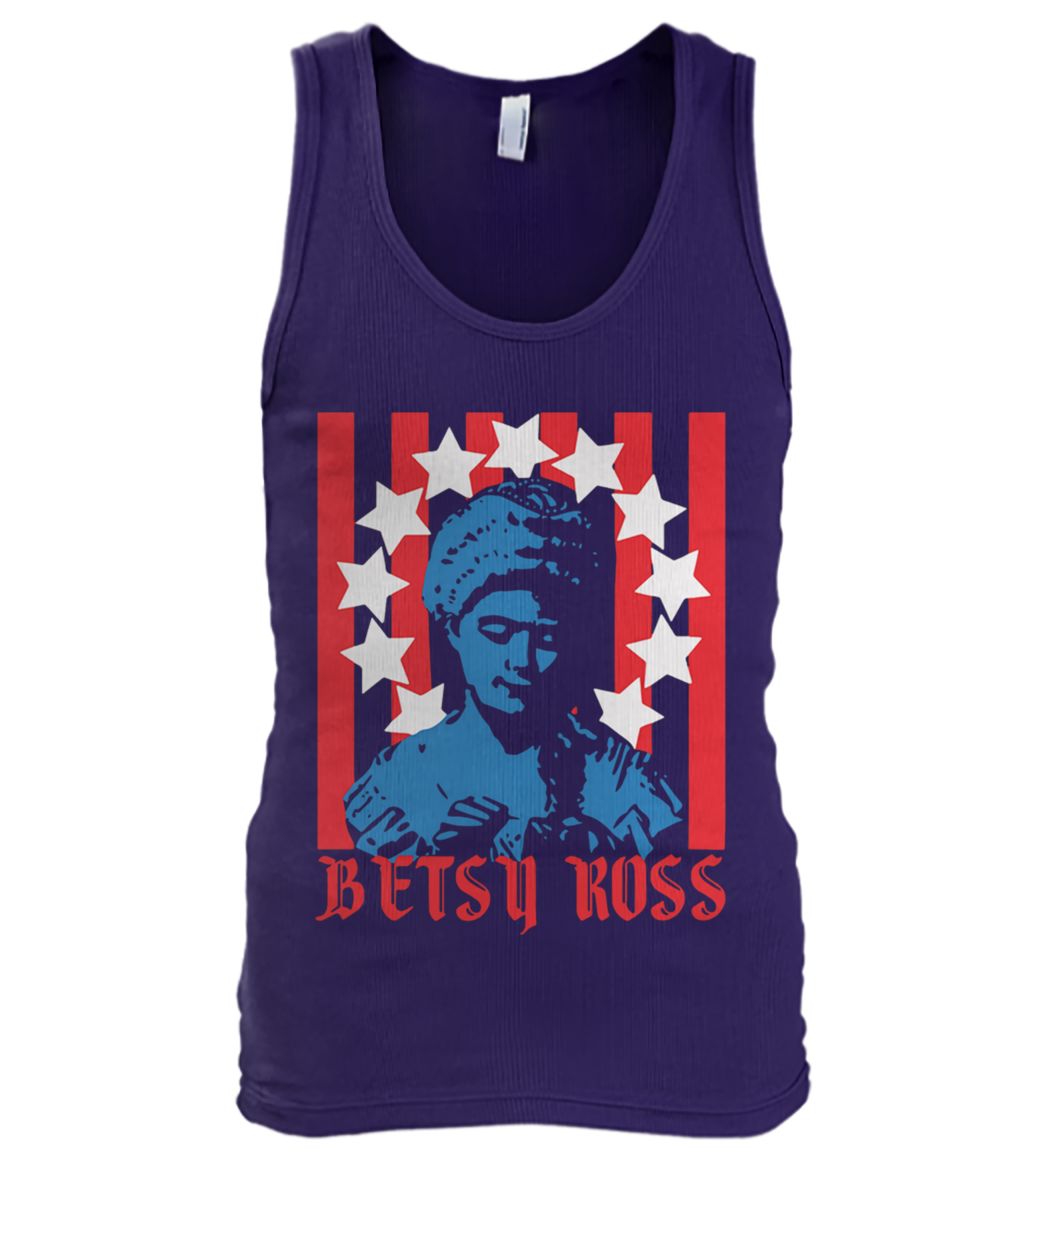 Betsy ross making the first american flag men's tank top